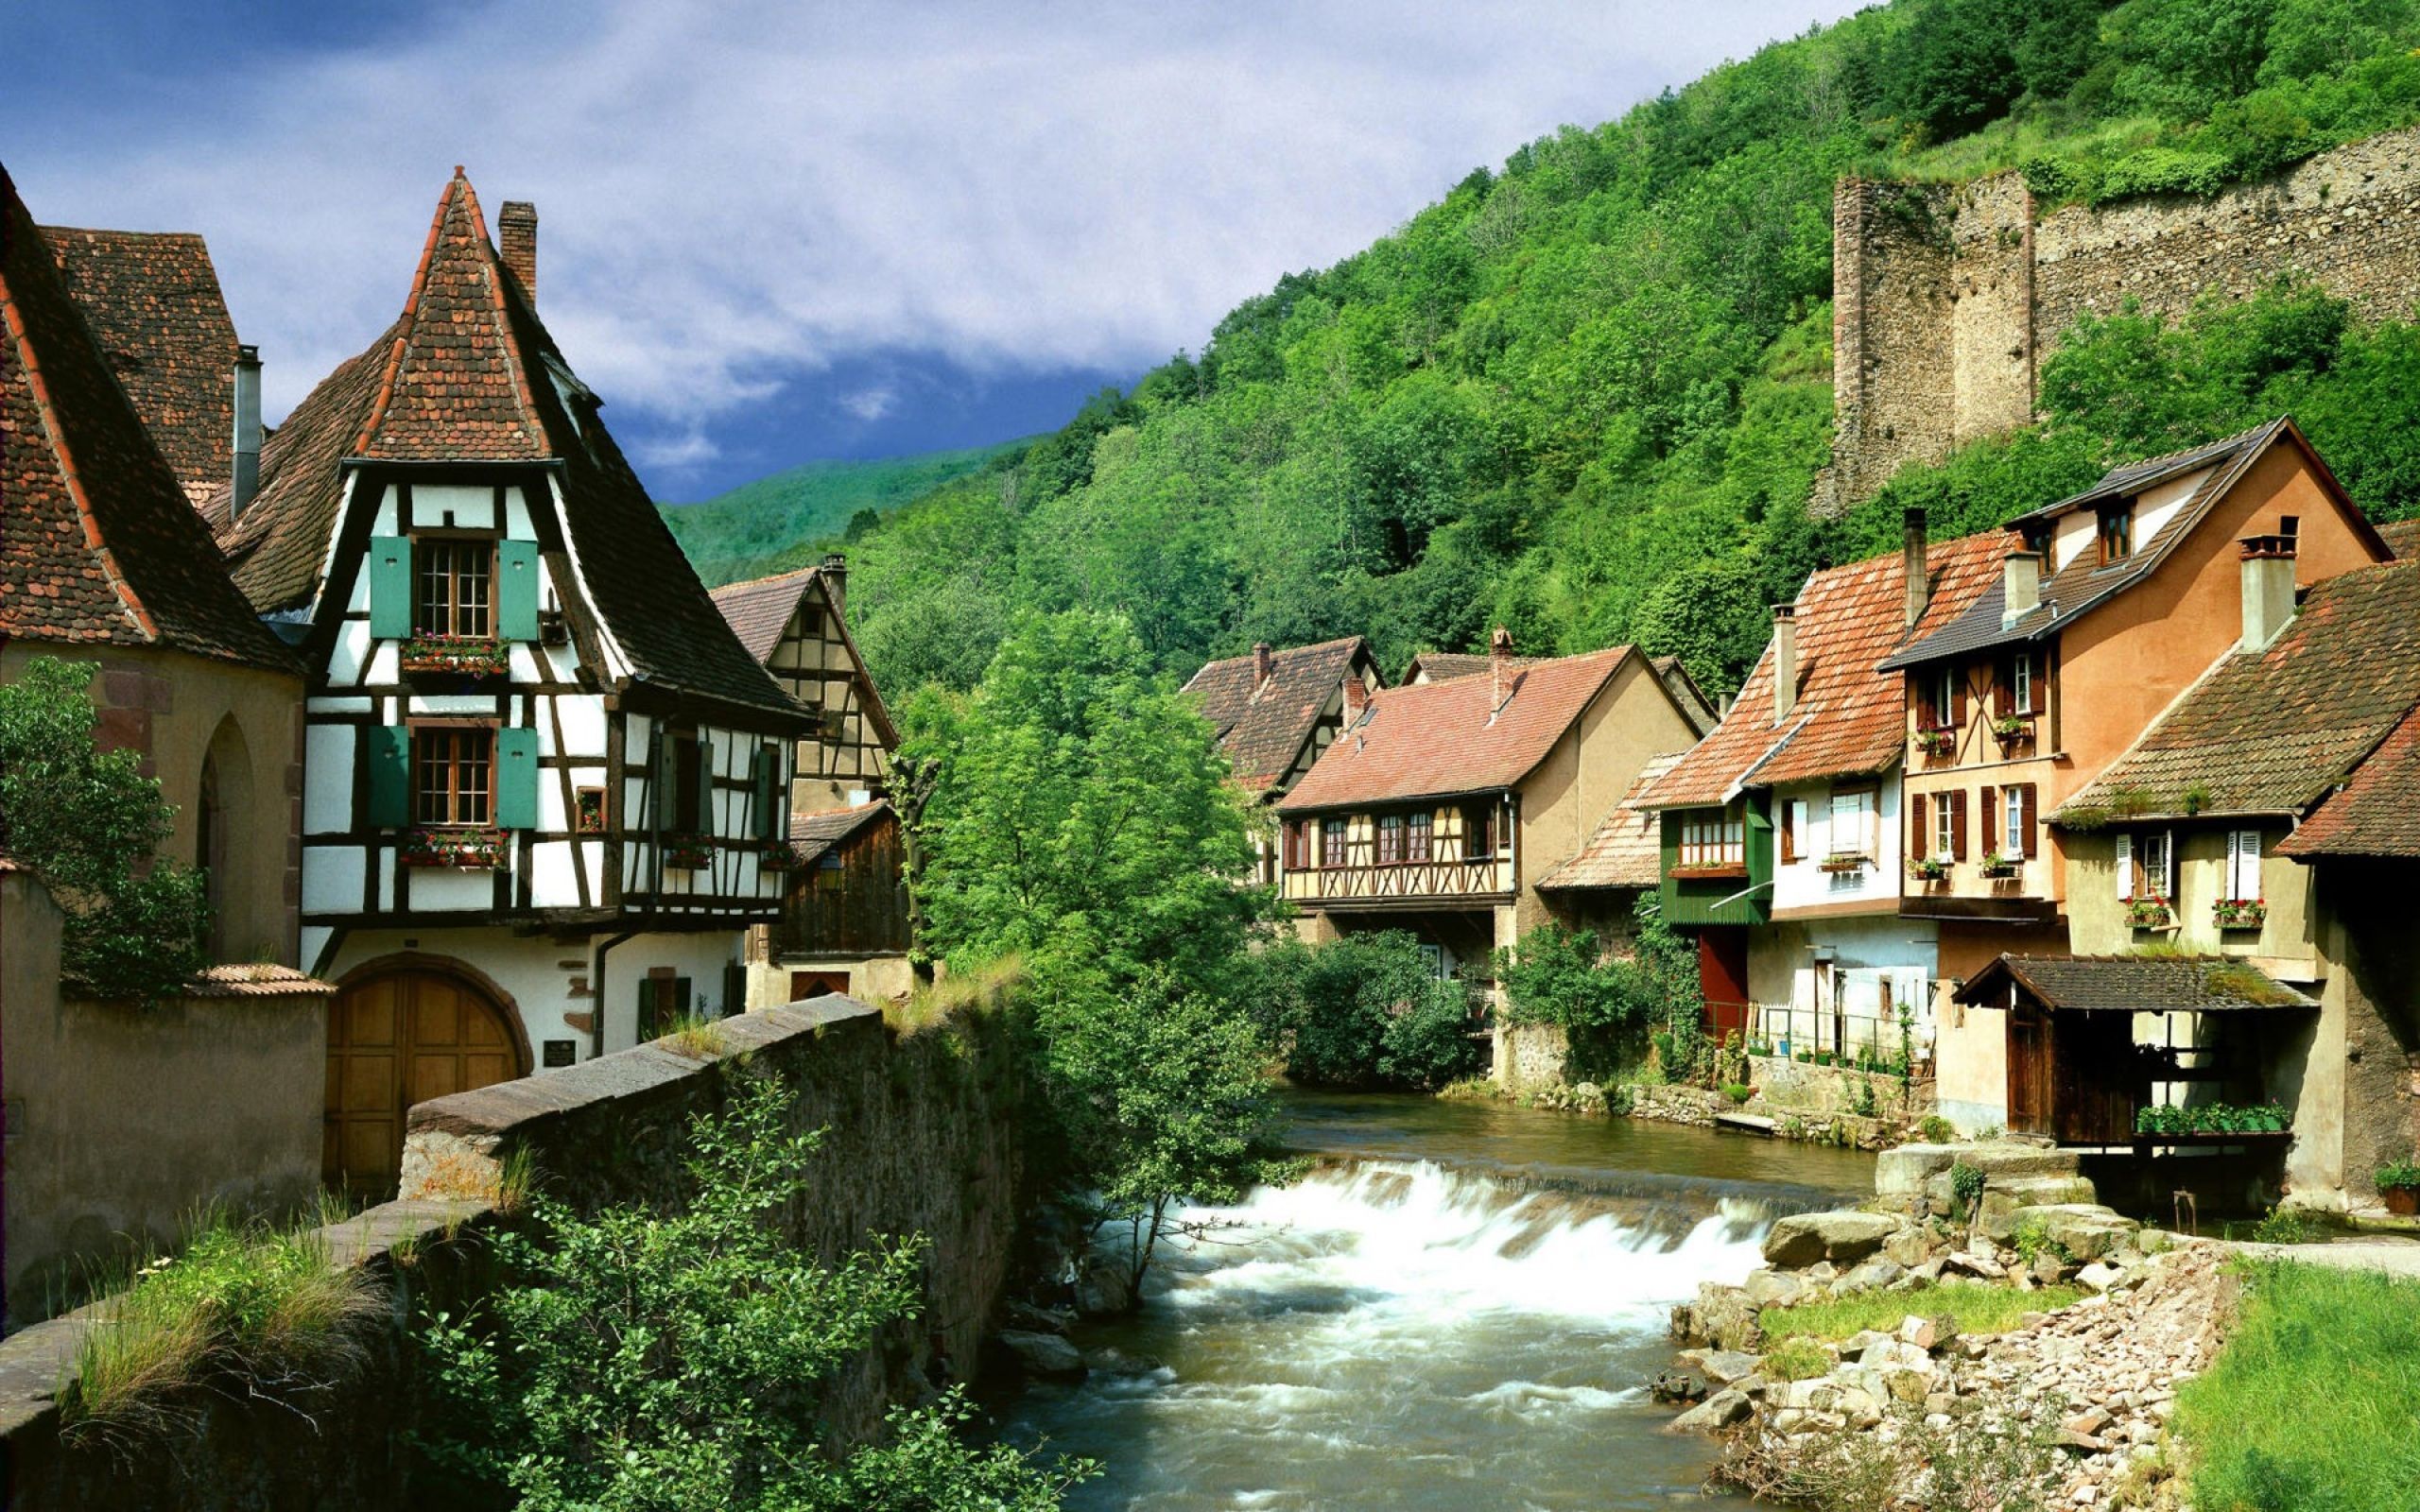 Download Wallpaper 2560x1600 France, Buildings, Houses, Mountain